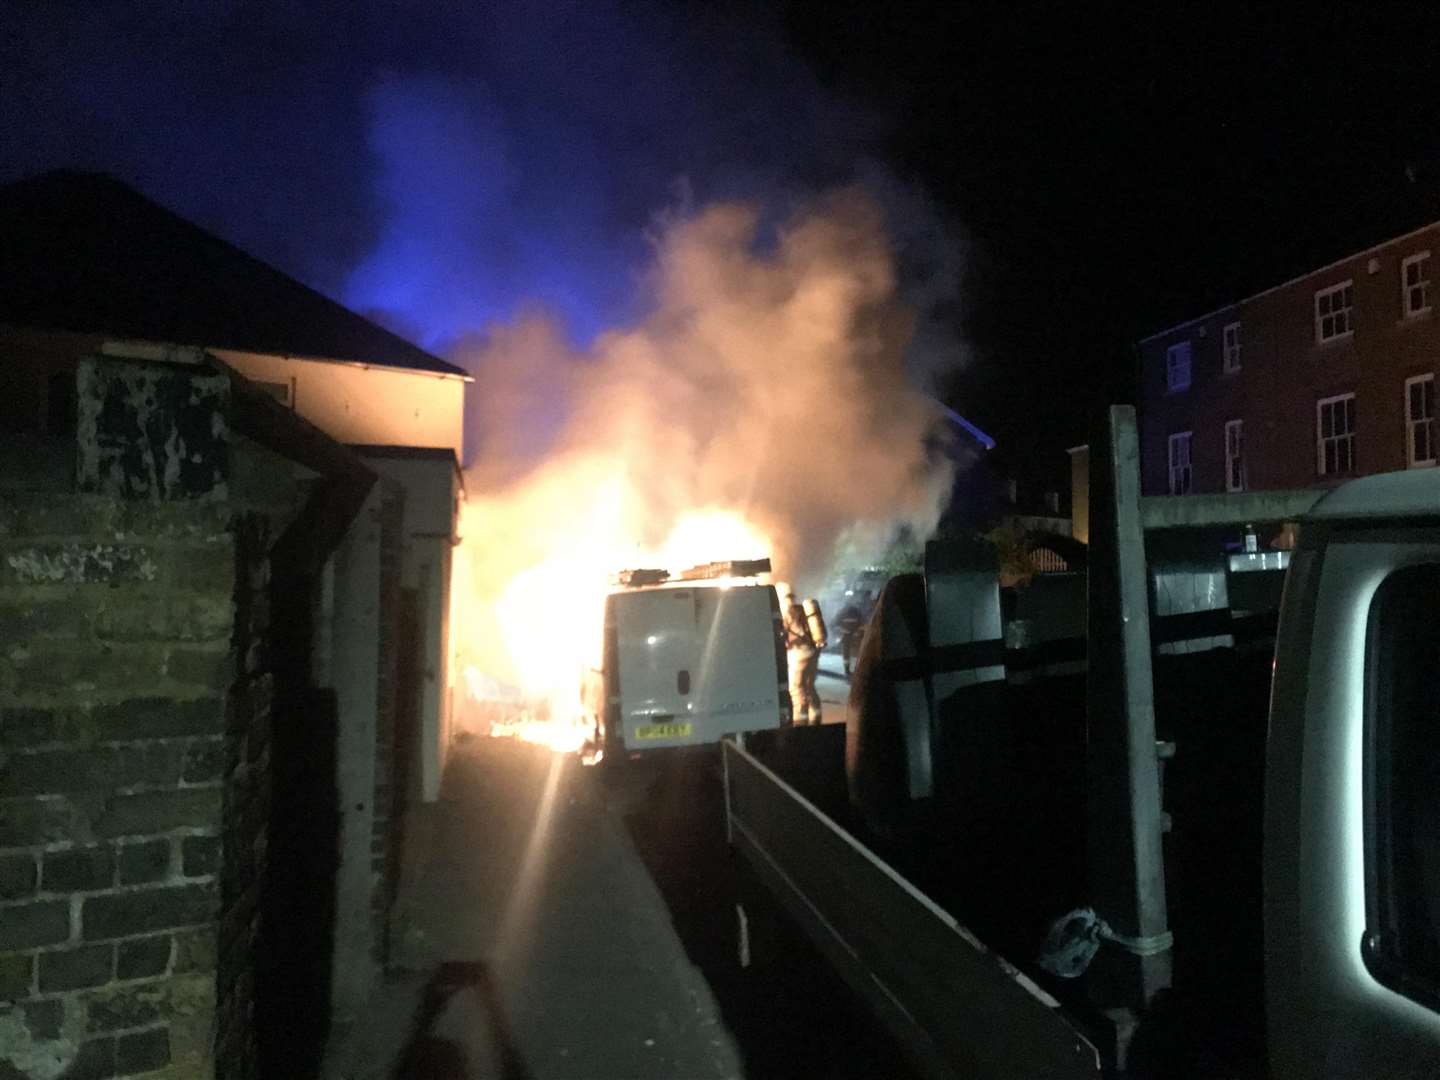 Firefighters were called to the van blaze about 1am (1941695)